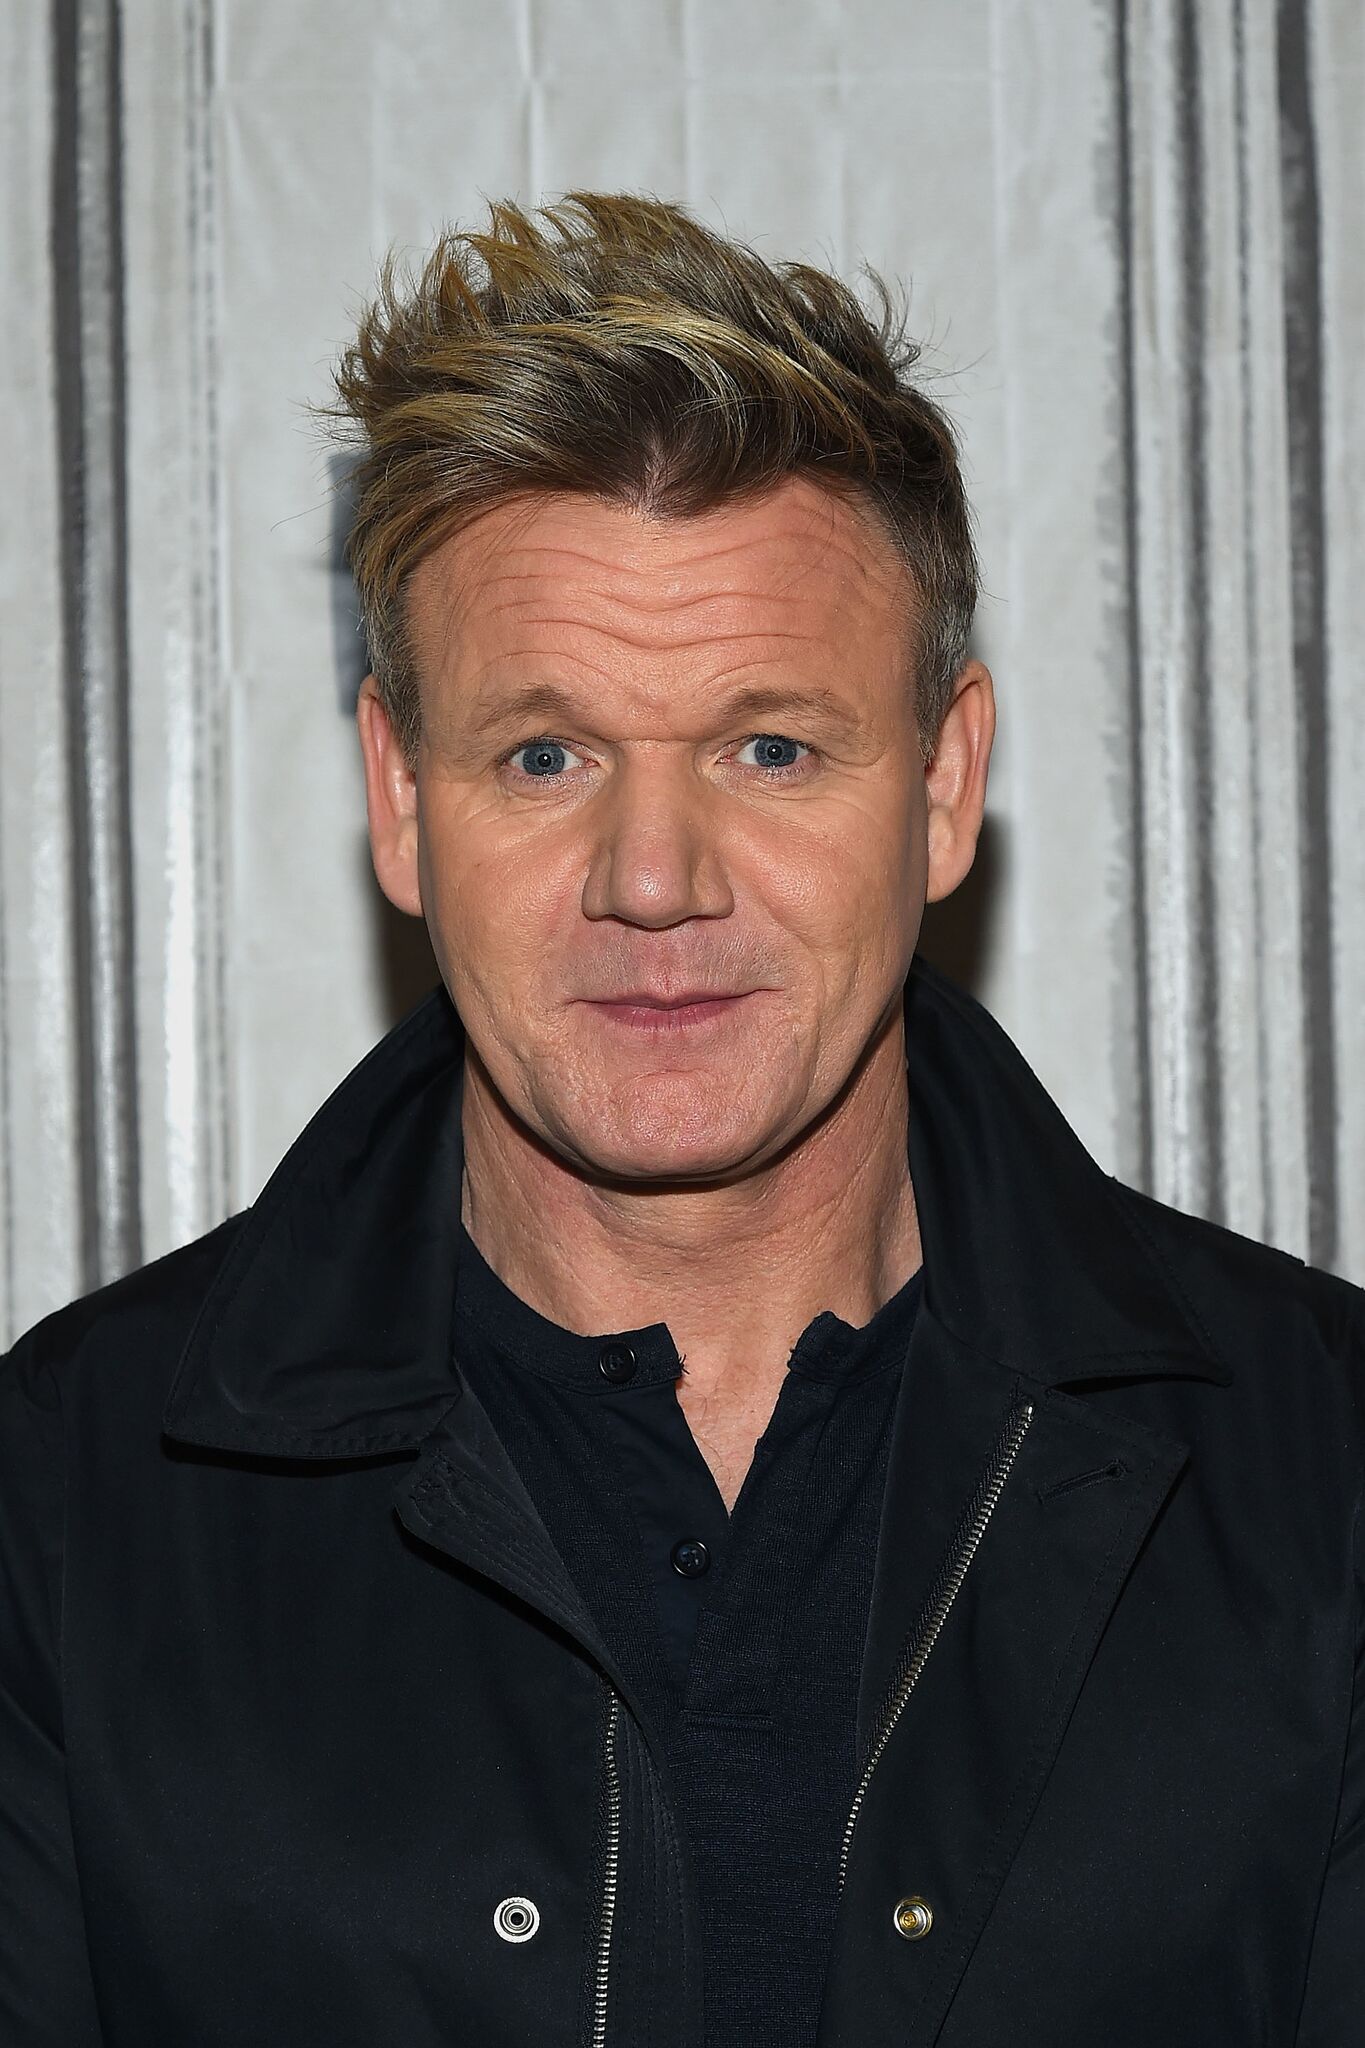 Celebrity Chef Gordon Ramsay attends the Build Series to discuss "MasterClass: Gordon Ramsay Teaches Cooking" at Build Studio on February 3, 2017 | Photo: Getty Images